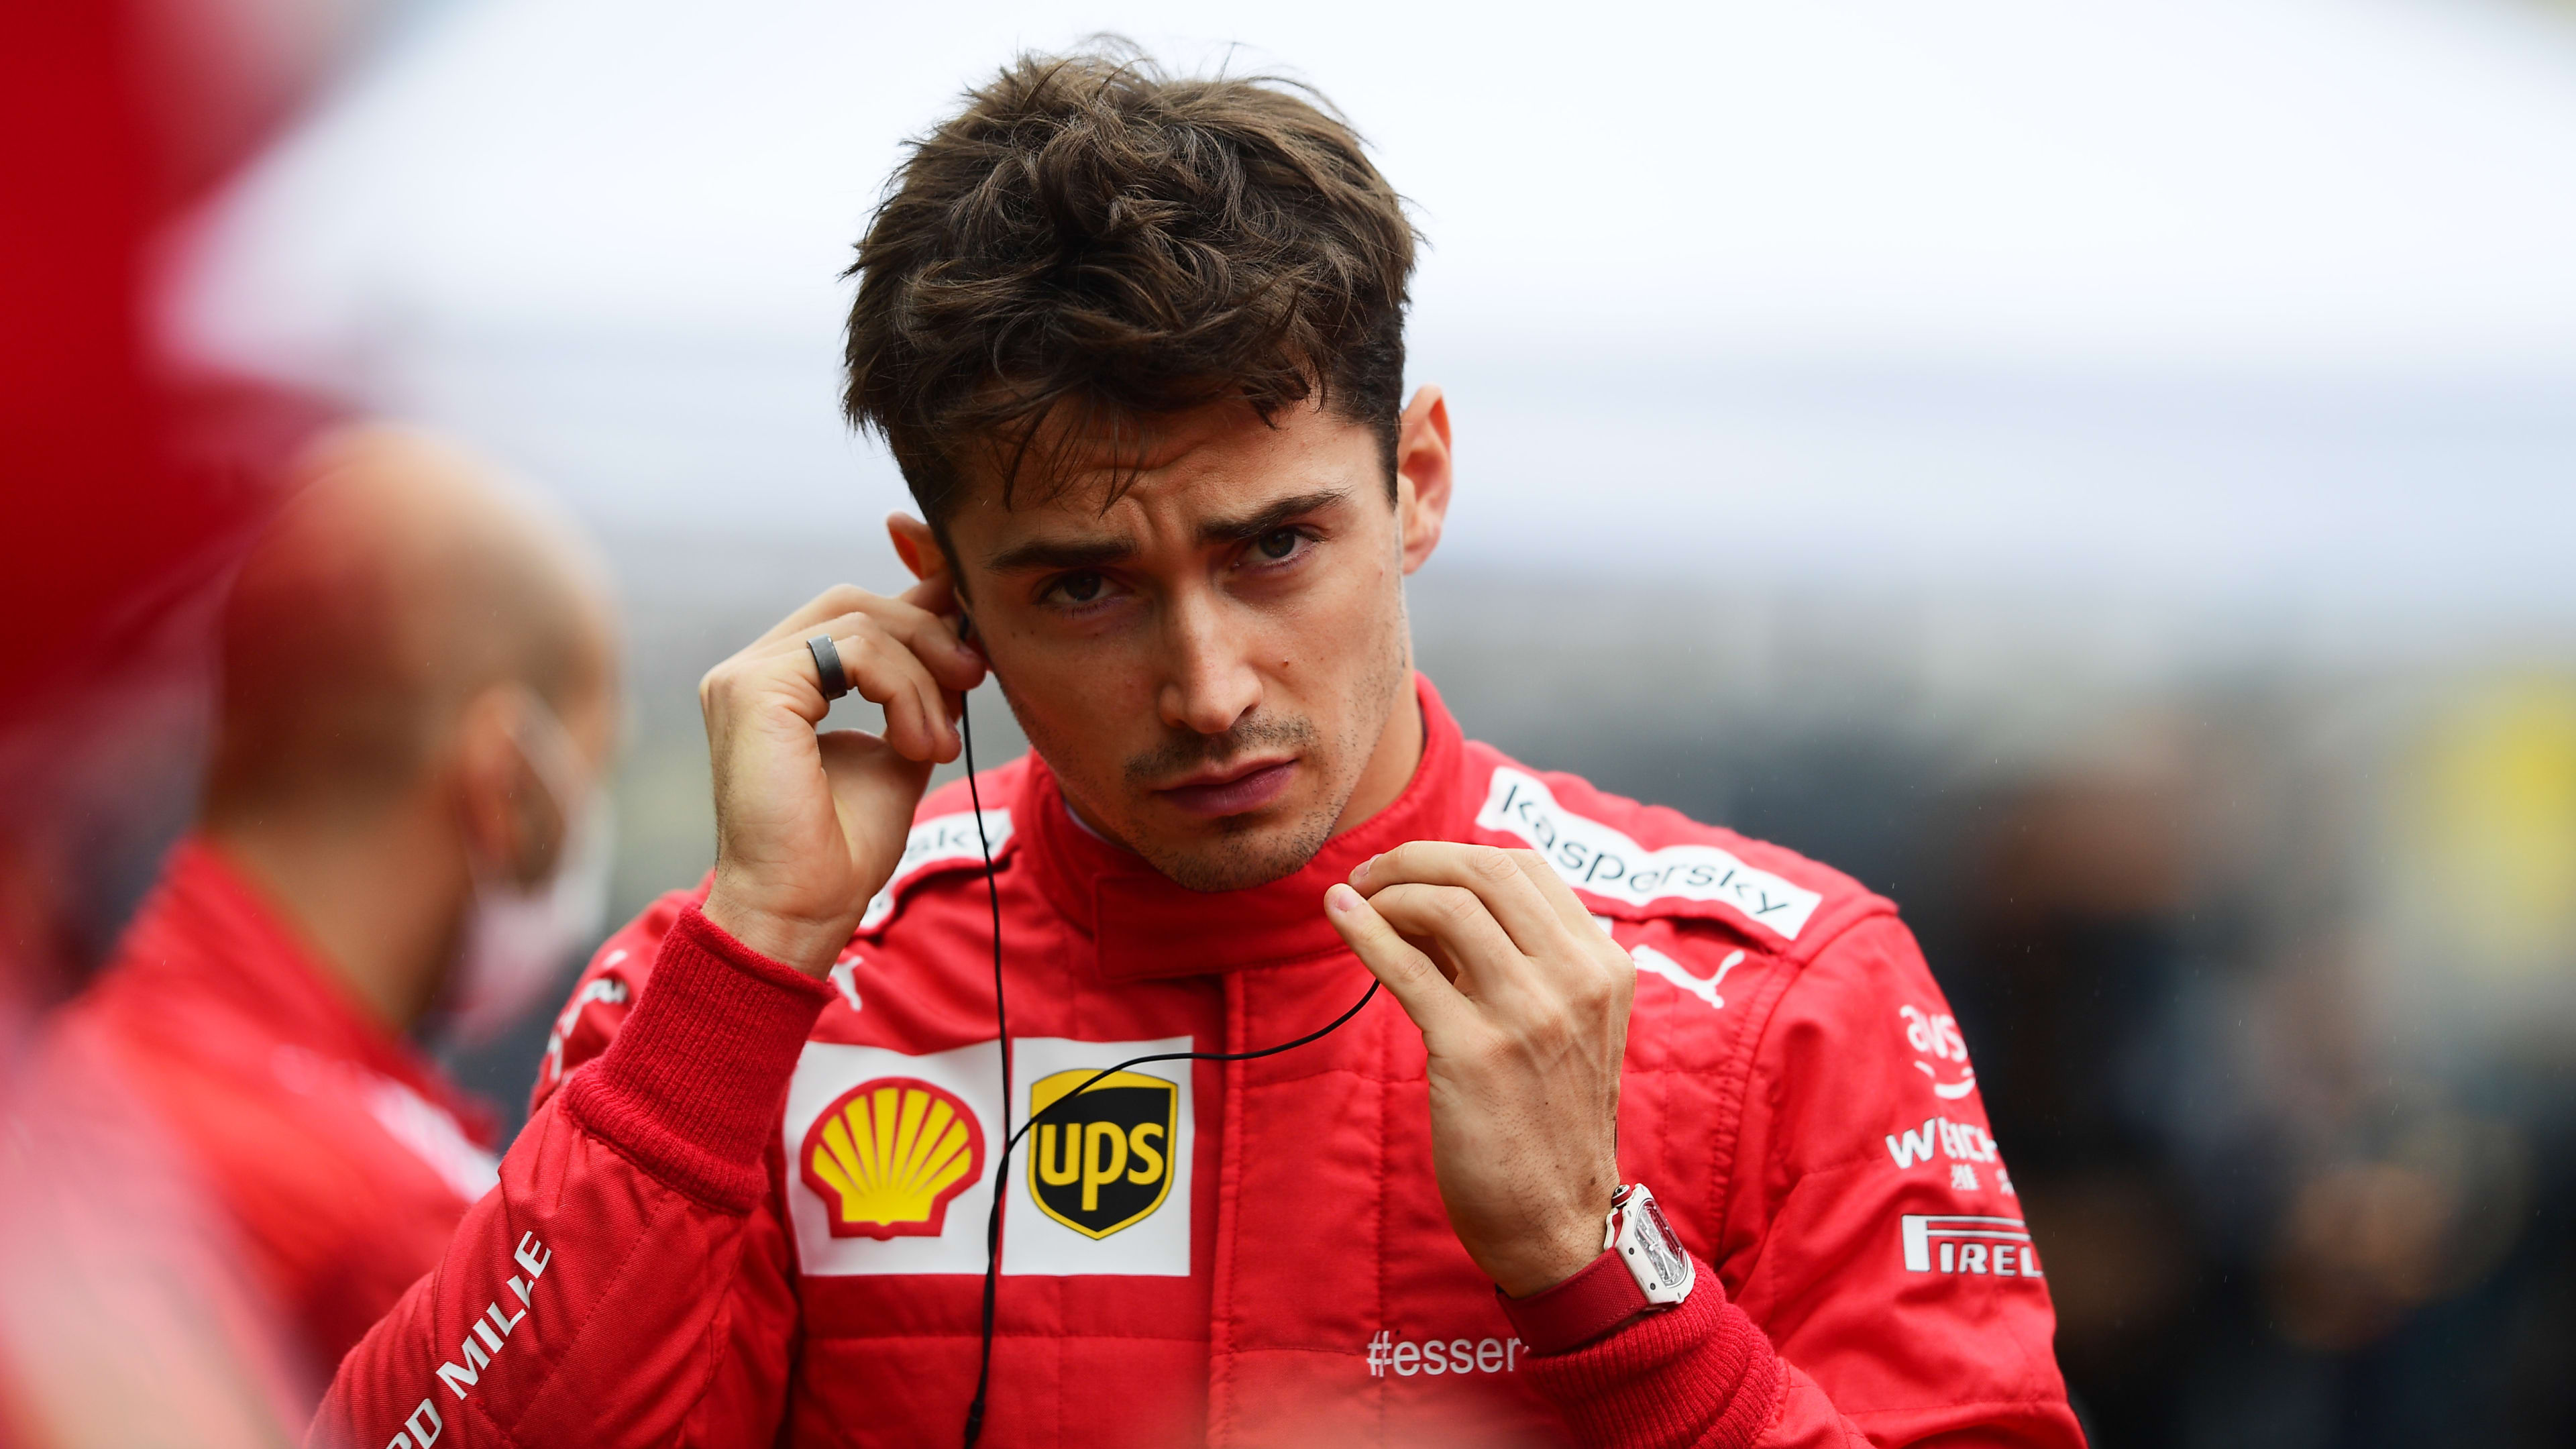 Leclerc says no regrets after late stop rules out Ferrari podium